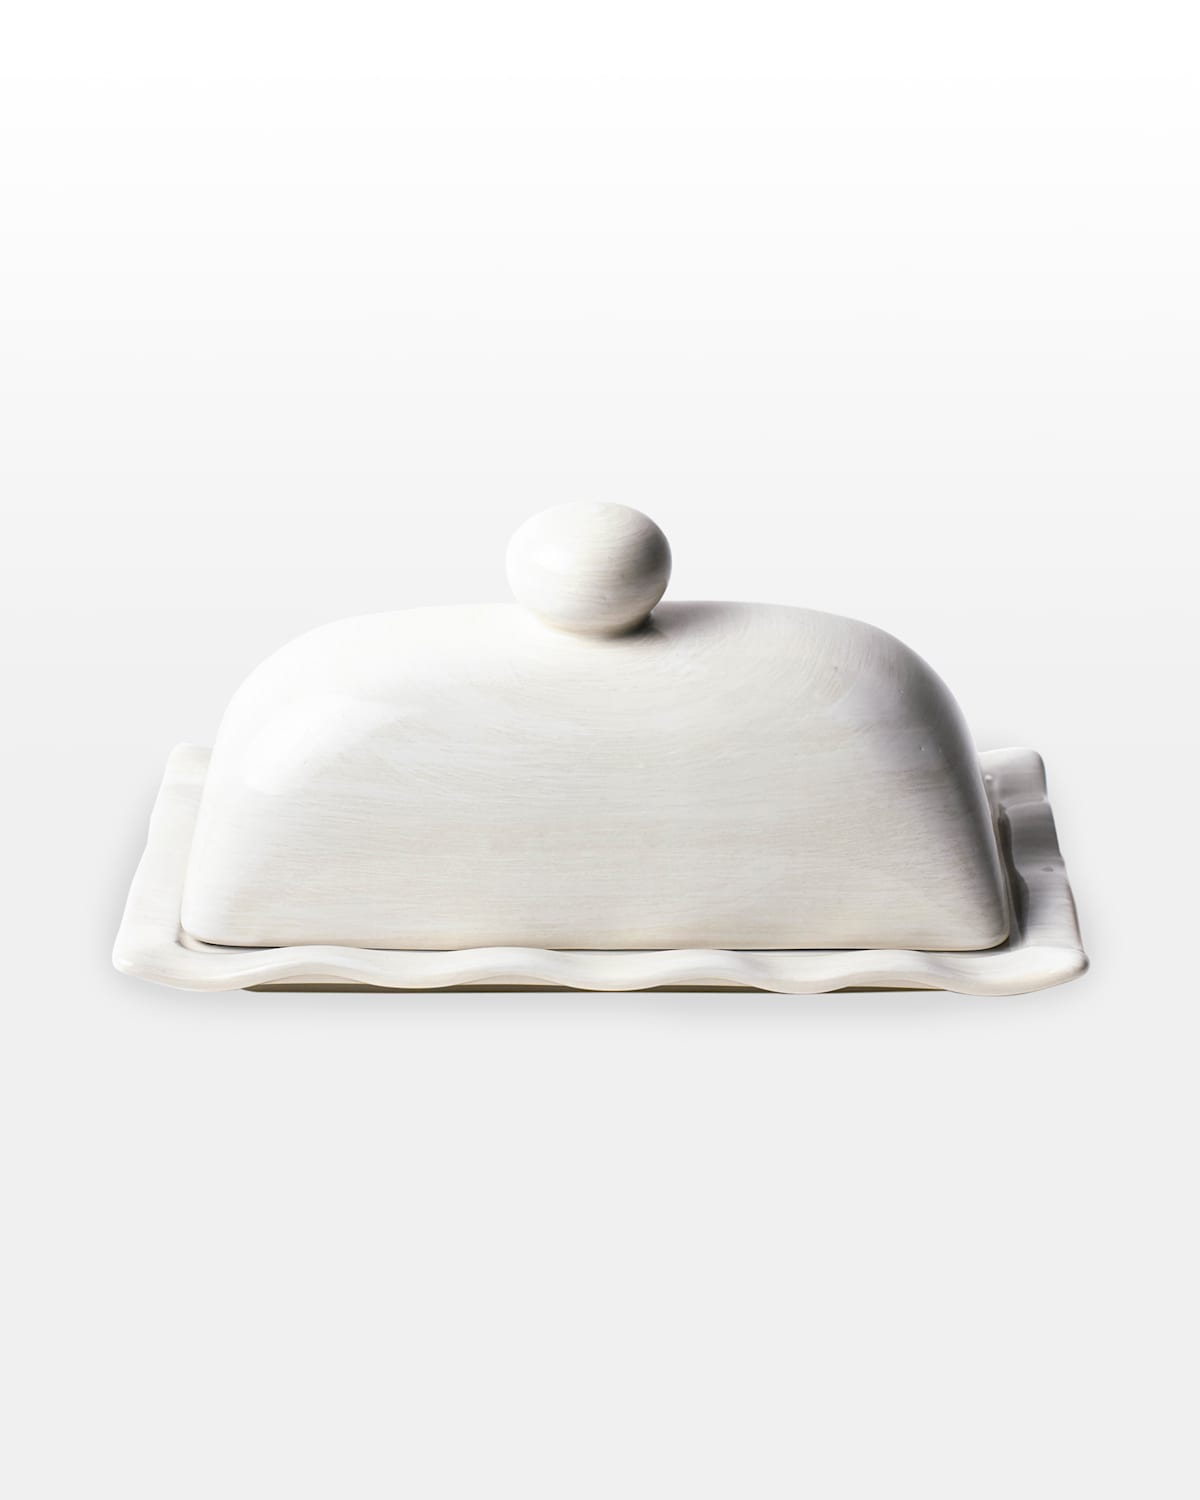 Shop Coton Colors Signature White Ruffle Domed Butter Dish